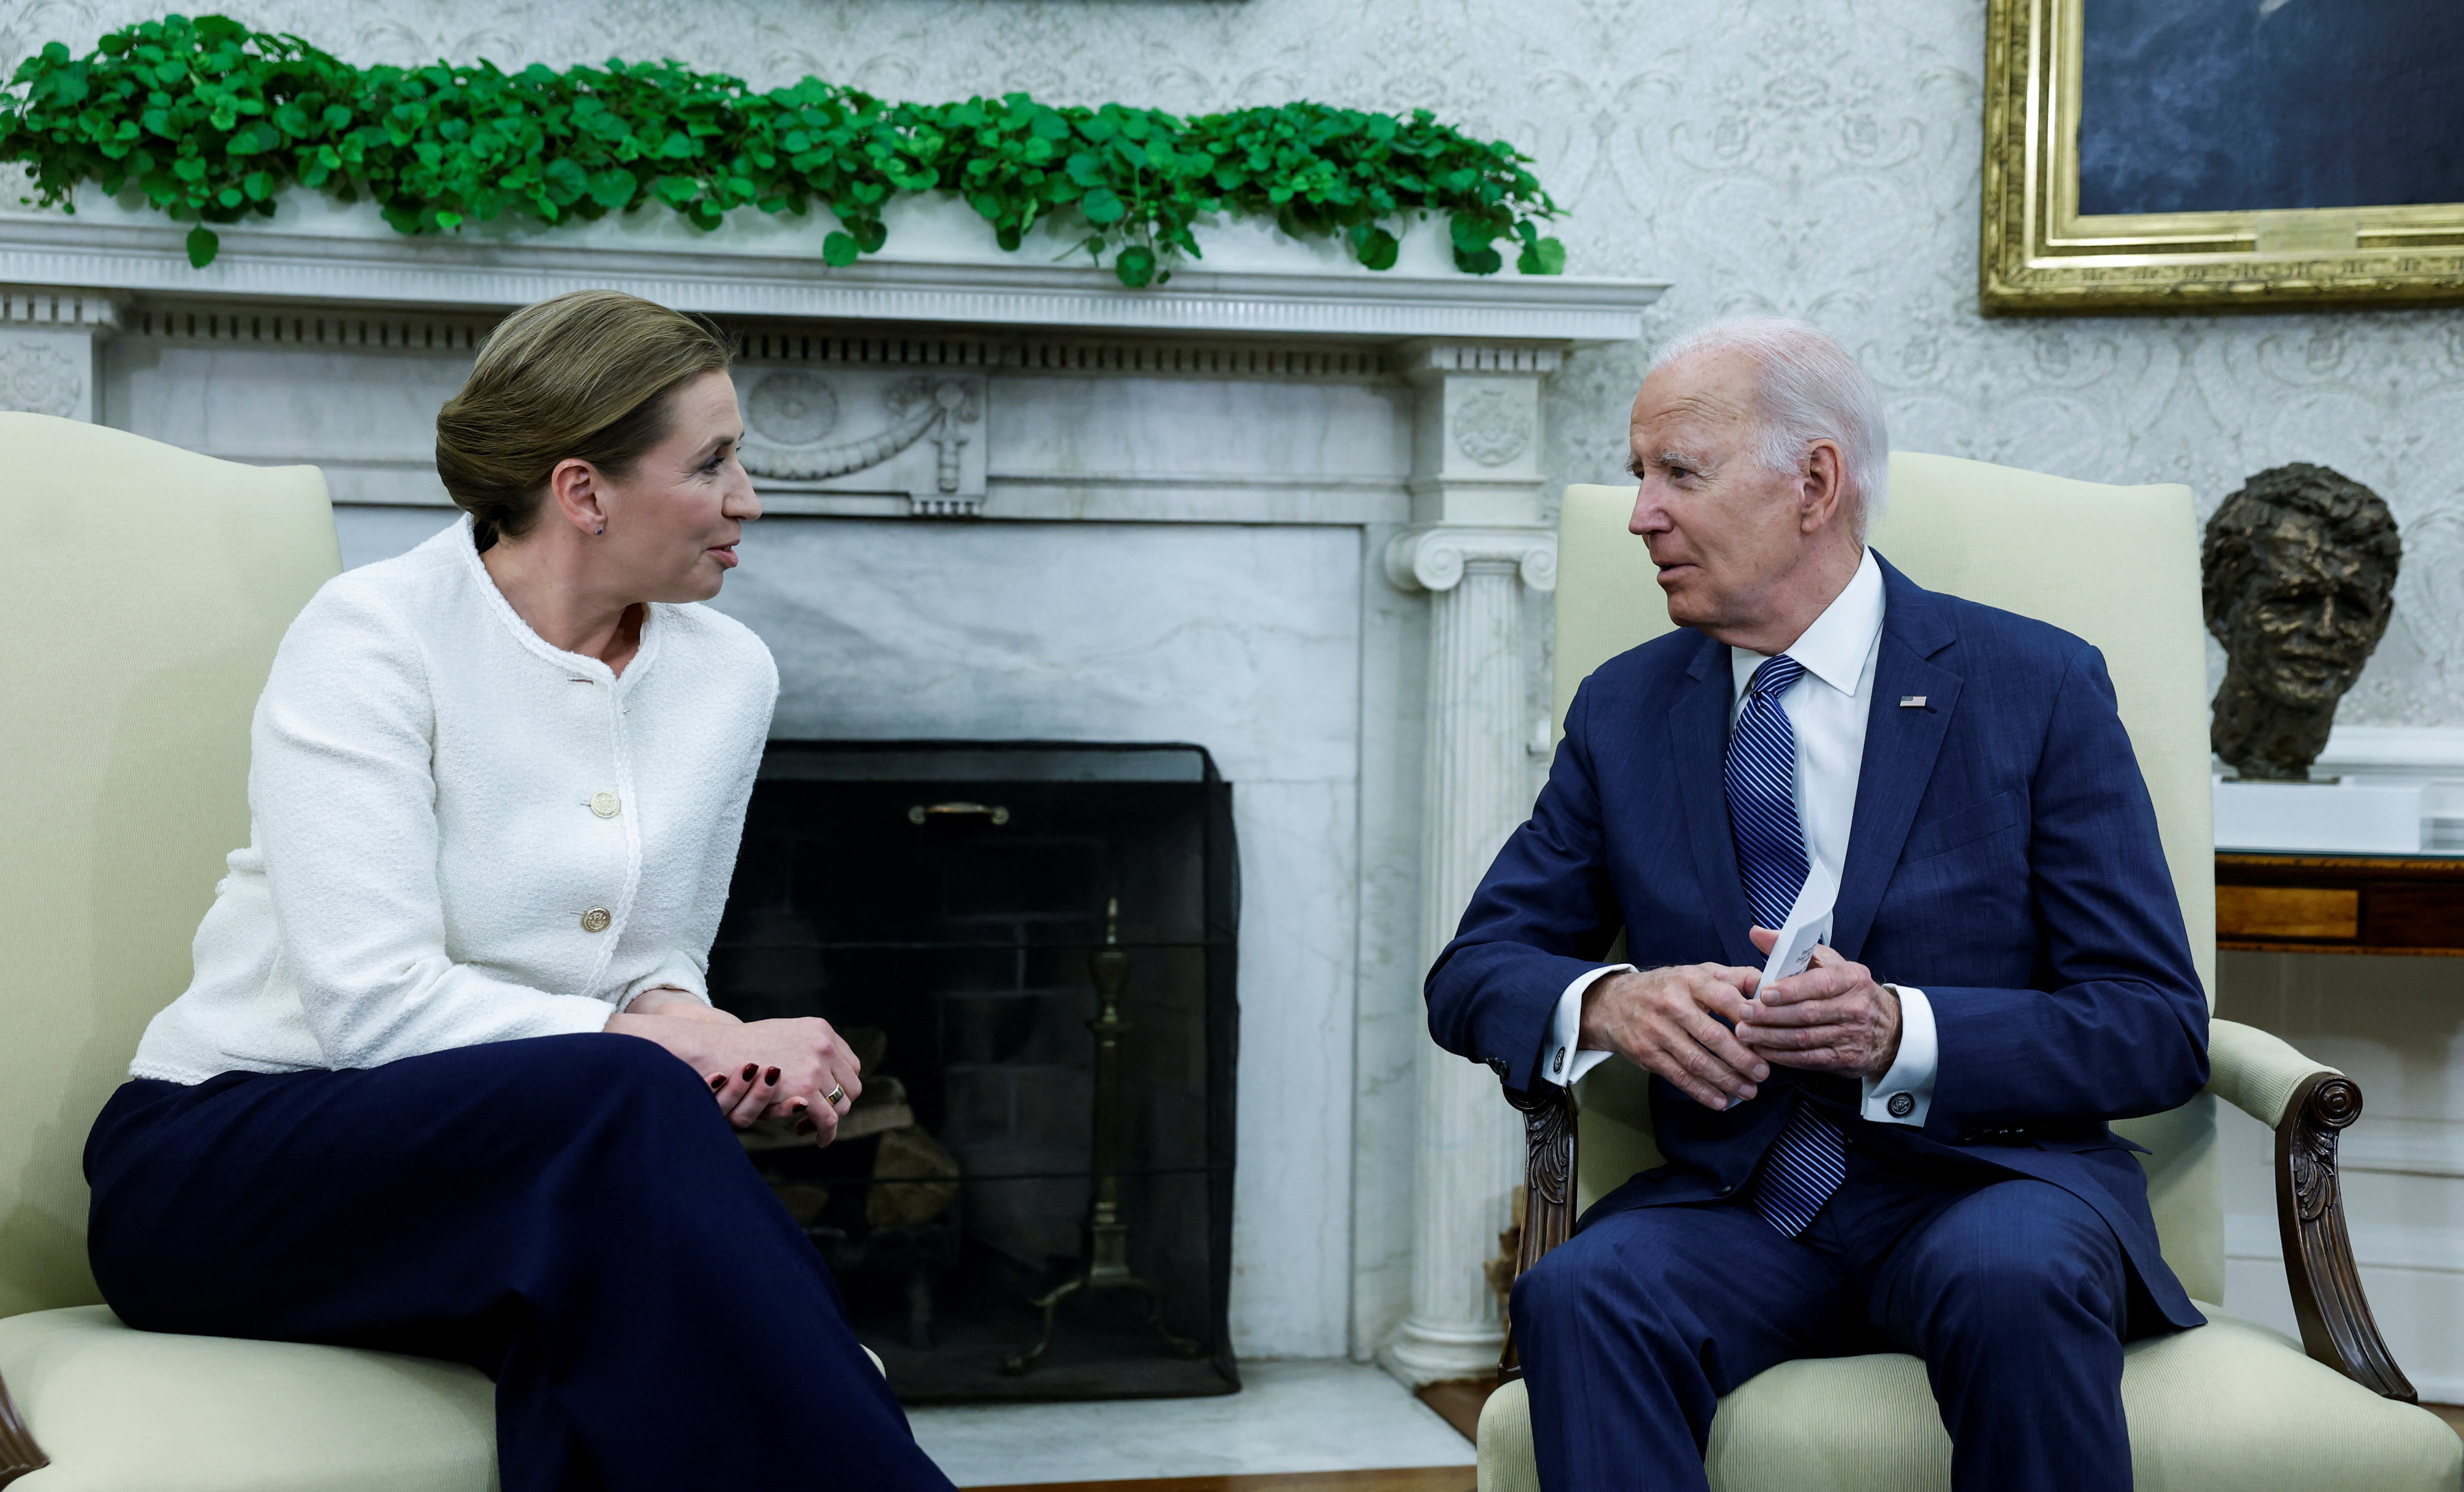 U.S. President Biden meets with Danish Prime Minister Frederiksen at the White House in Washington